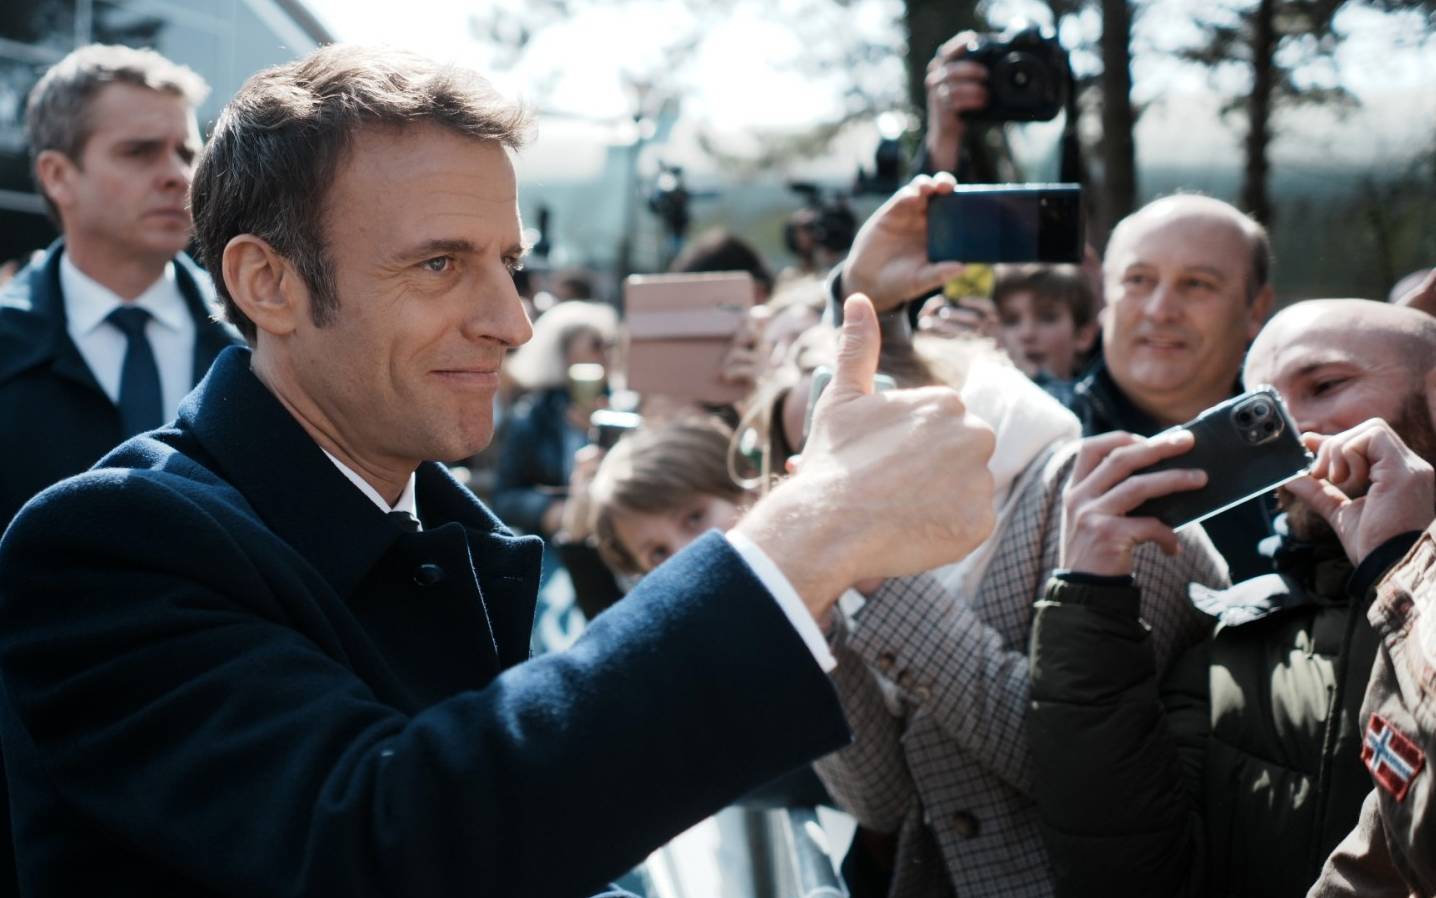 France's President and LREM party presidential candidate Emmanuel Macron thumbs up after voting for the first round of France's presidential election at a polling station in Le Touquet, northern France on April 10, 2022. (Photo by Thibault Camus / POOL / AFP)